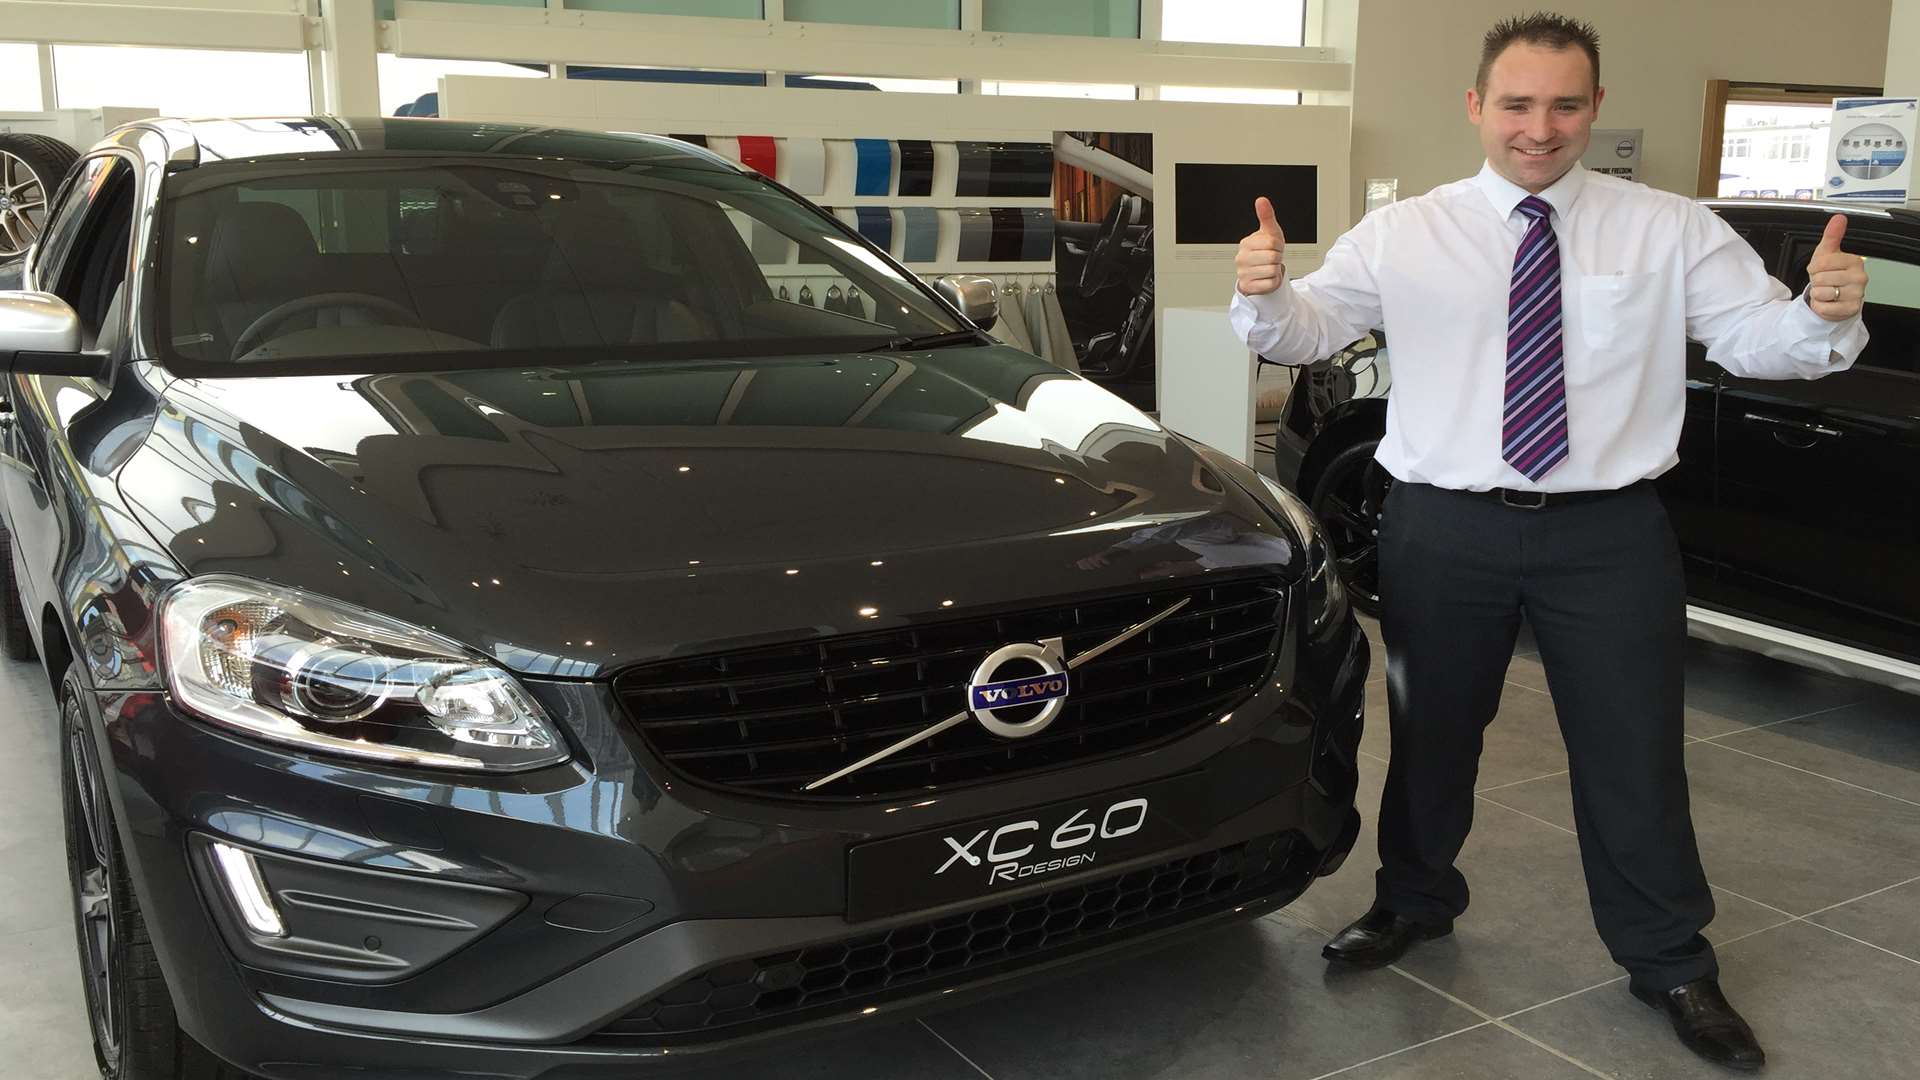 Michael Larkin, Sales Controller at Lipscomb Volvo shows his support for the inaugural KM Charity Golf Challenge in which a Volvo XC60 is up for grabs at the event.